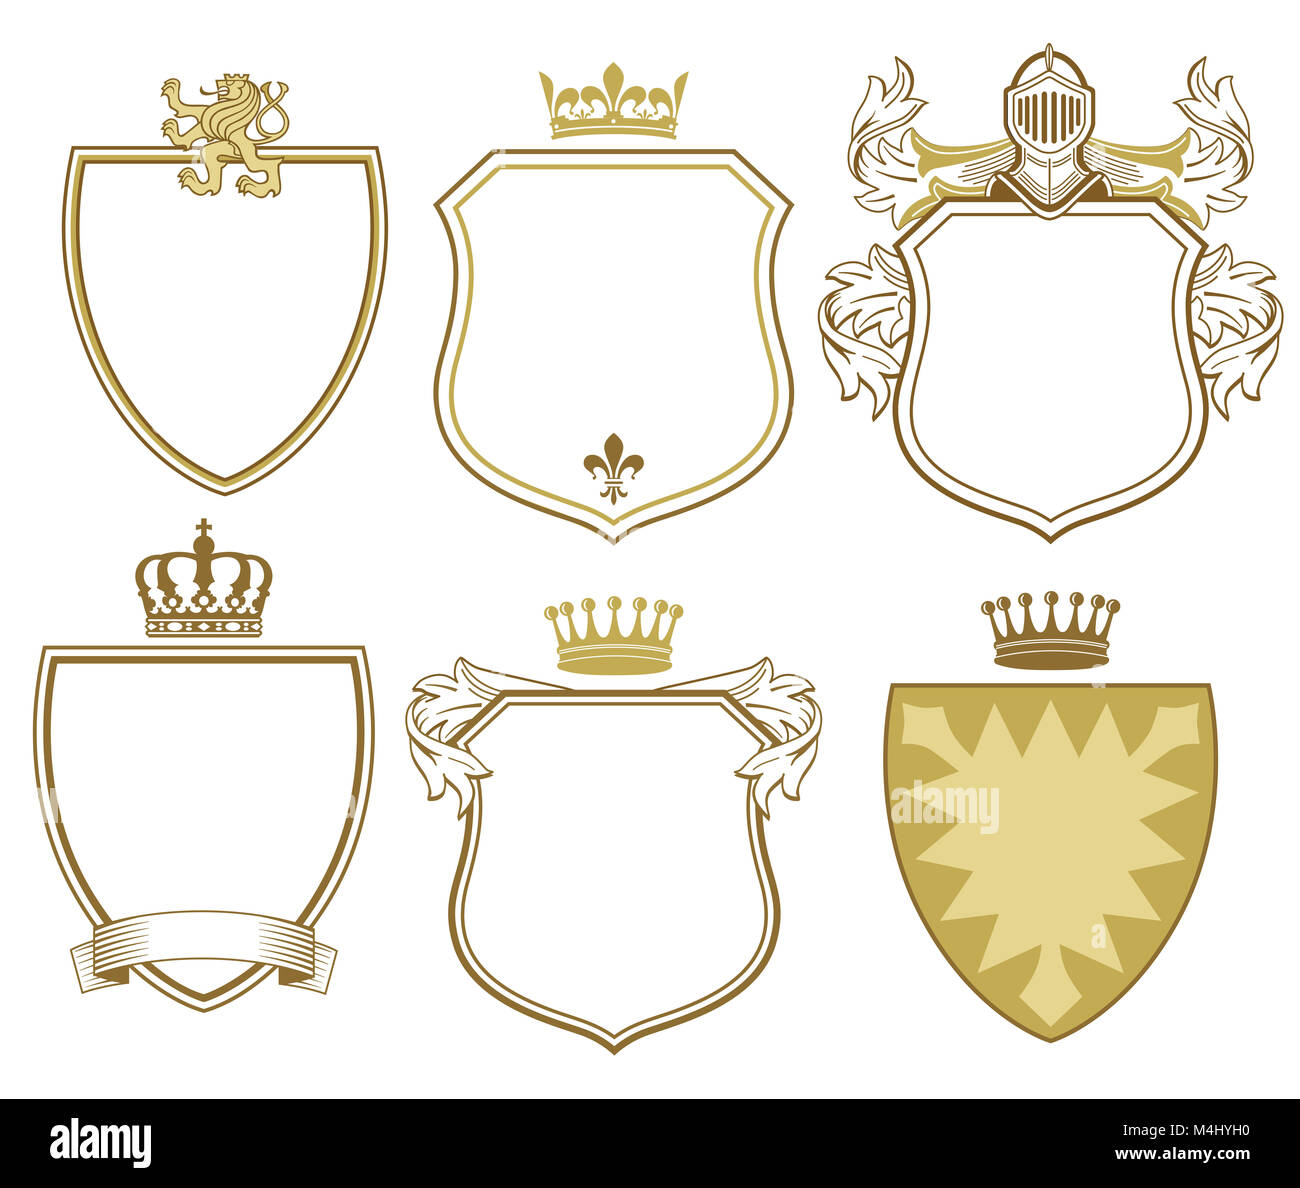 6 Princely coat of arms and shields Stock Photo